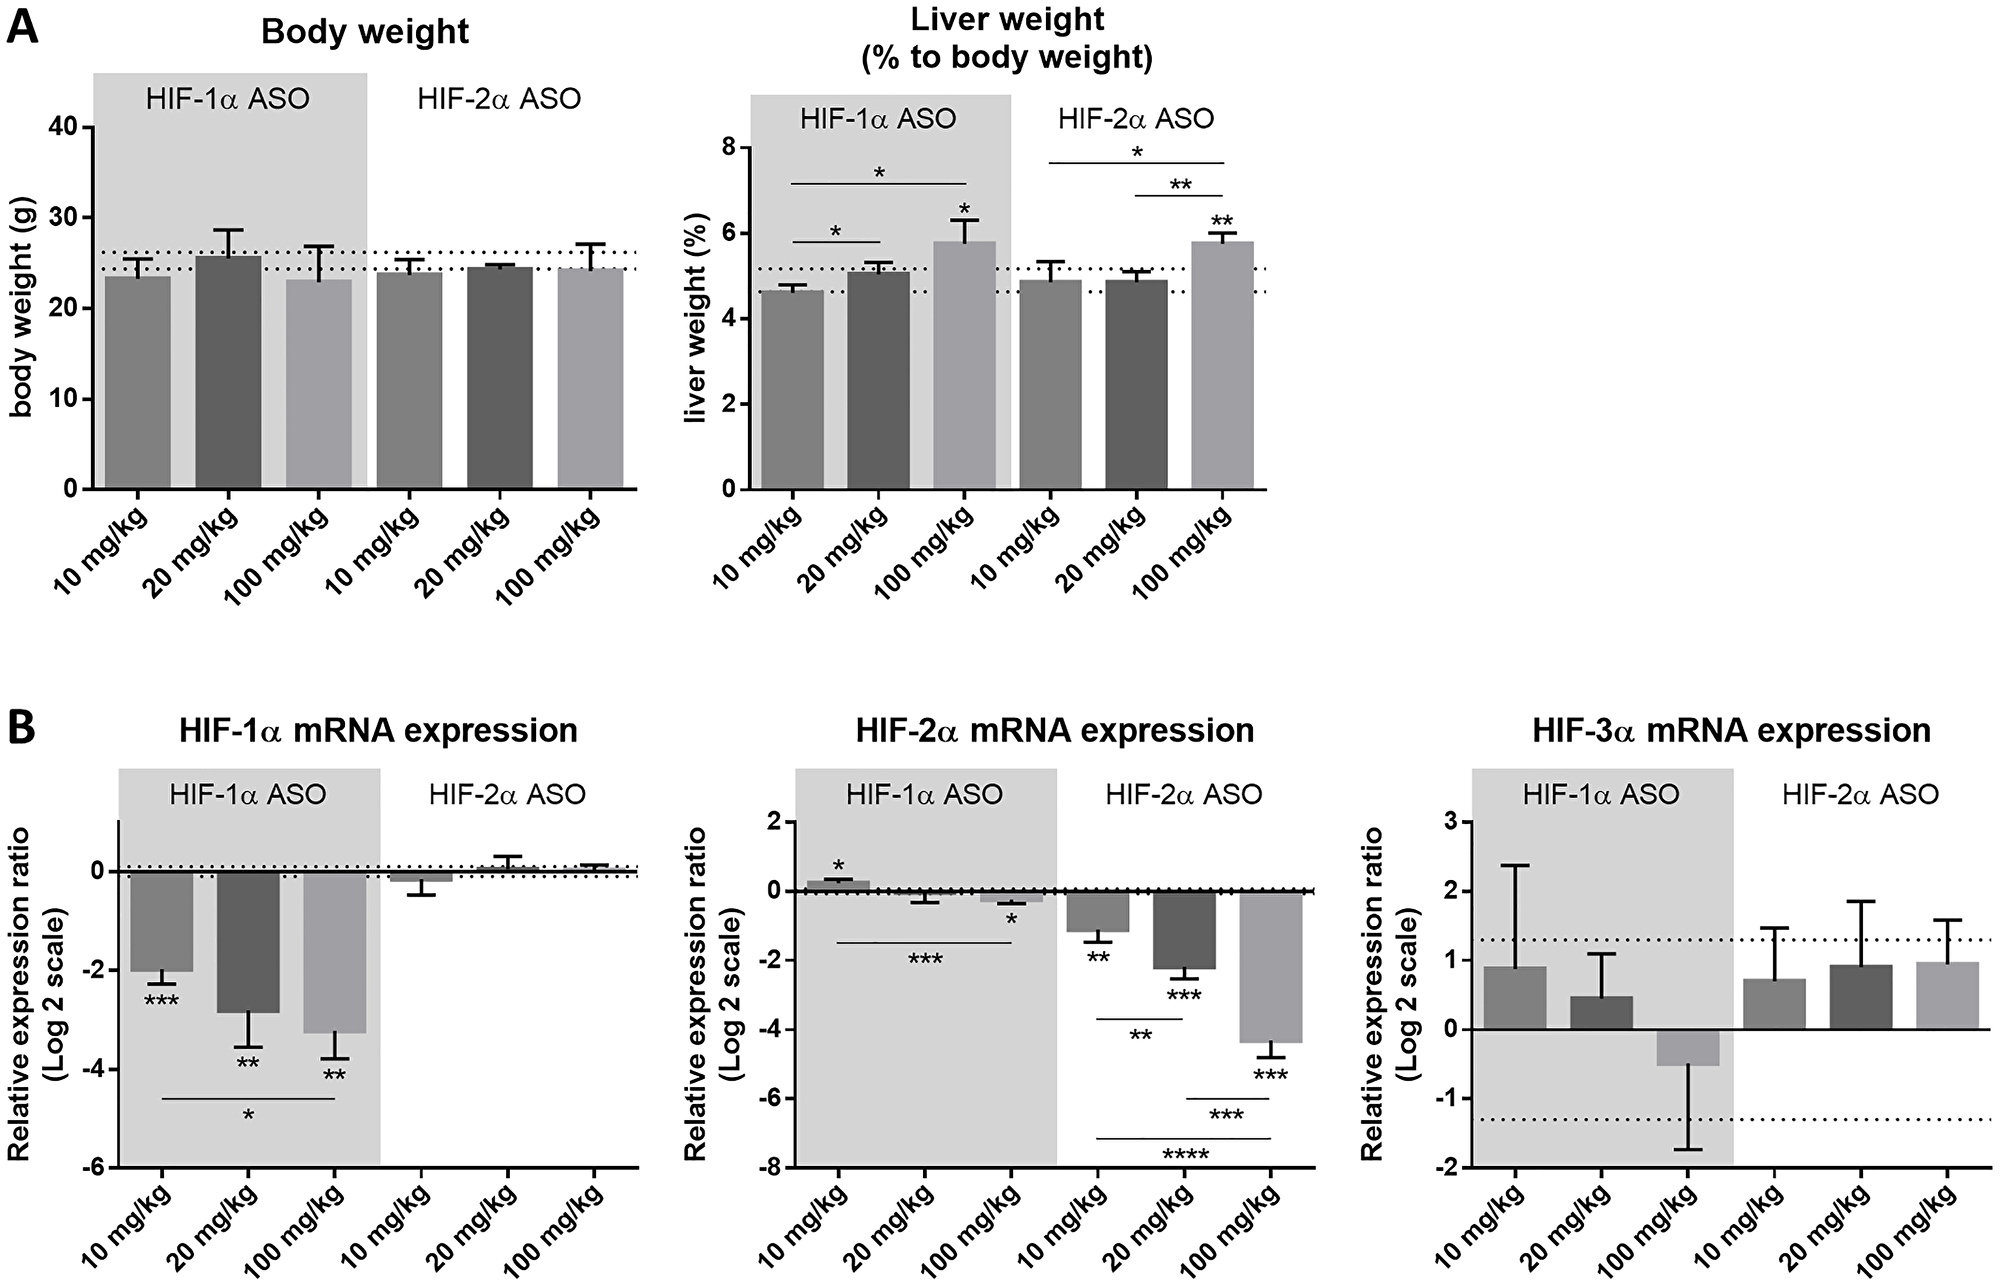 Efficacy and selectivity of different dosage regimens of HIF-1α and HIF-2α ASO.